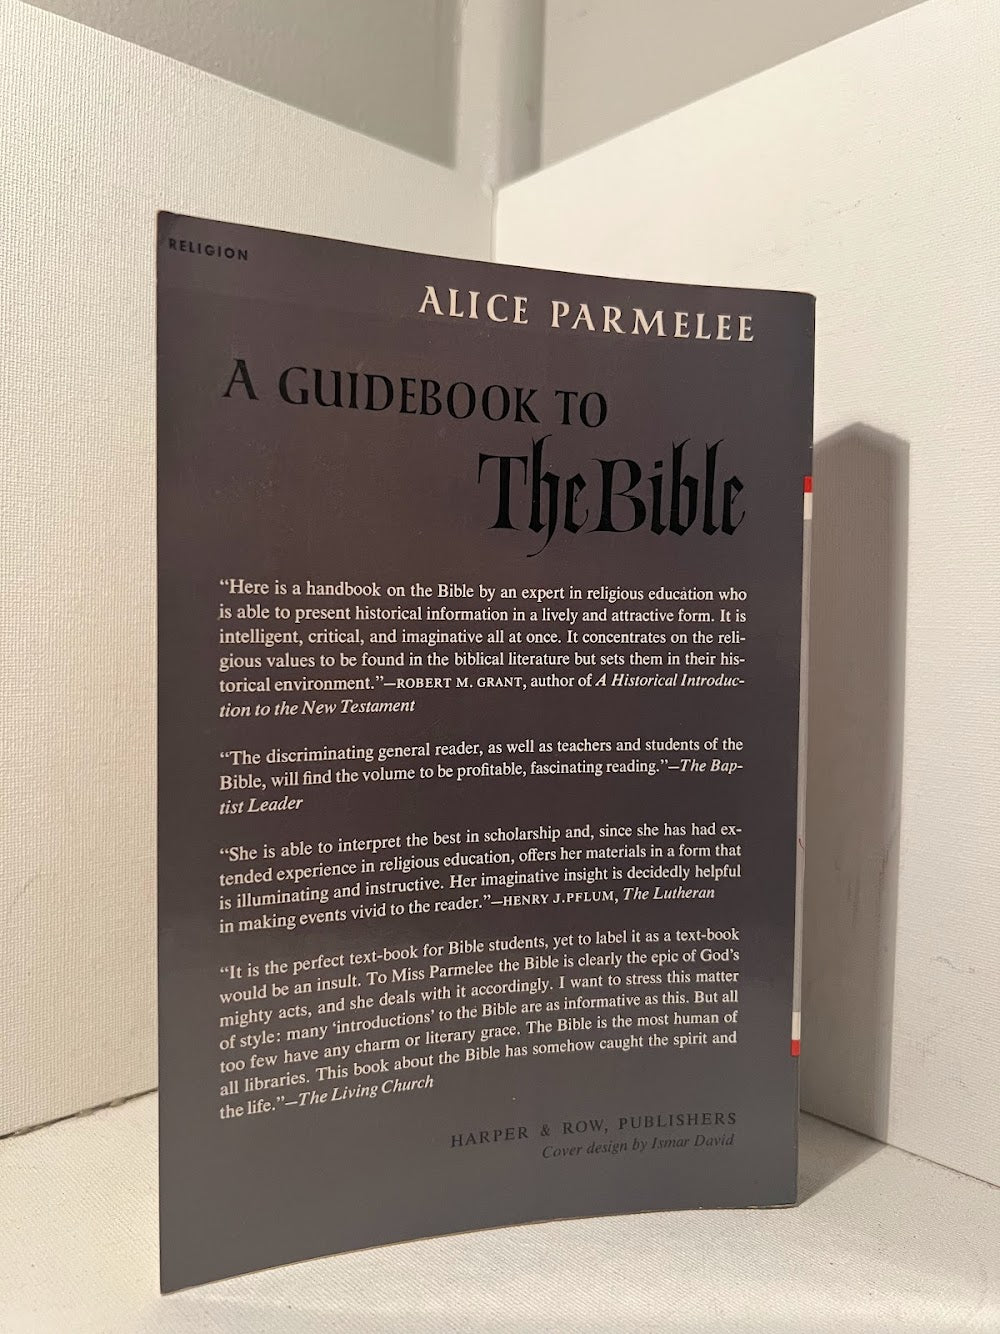 A Guidebook To The Bible by Alice Parmelee